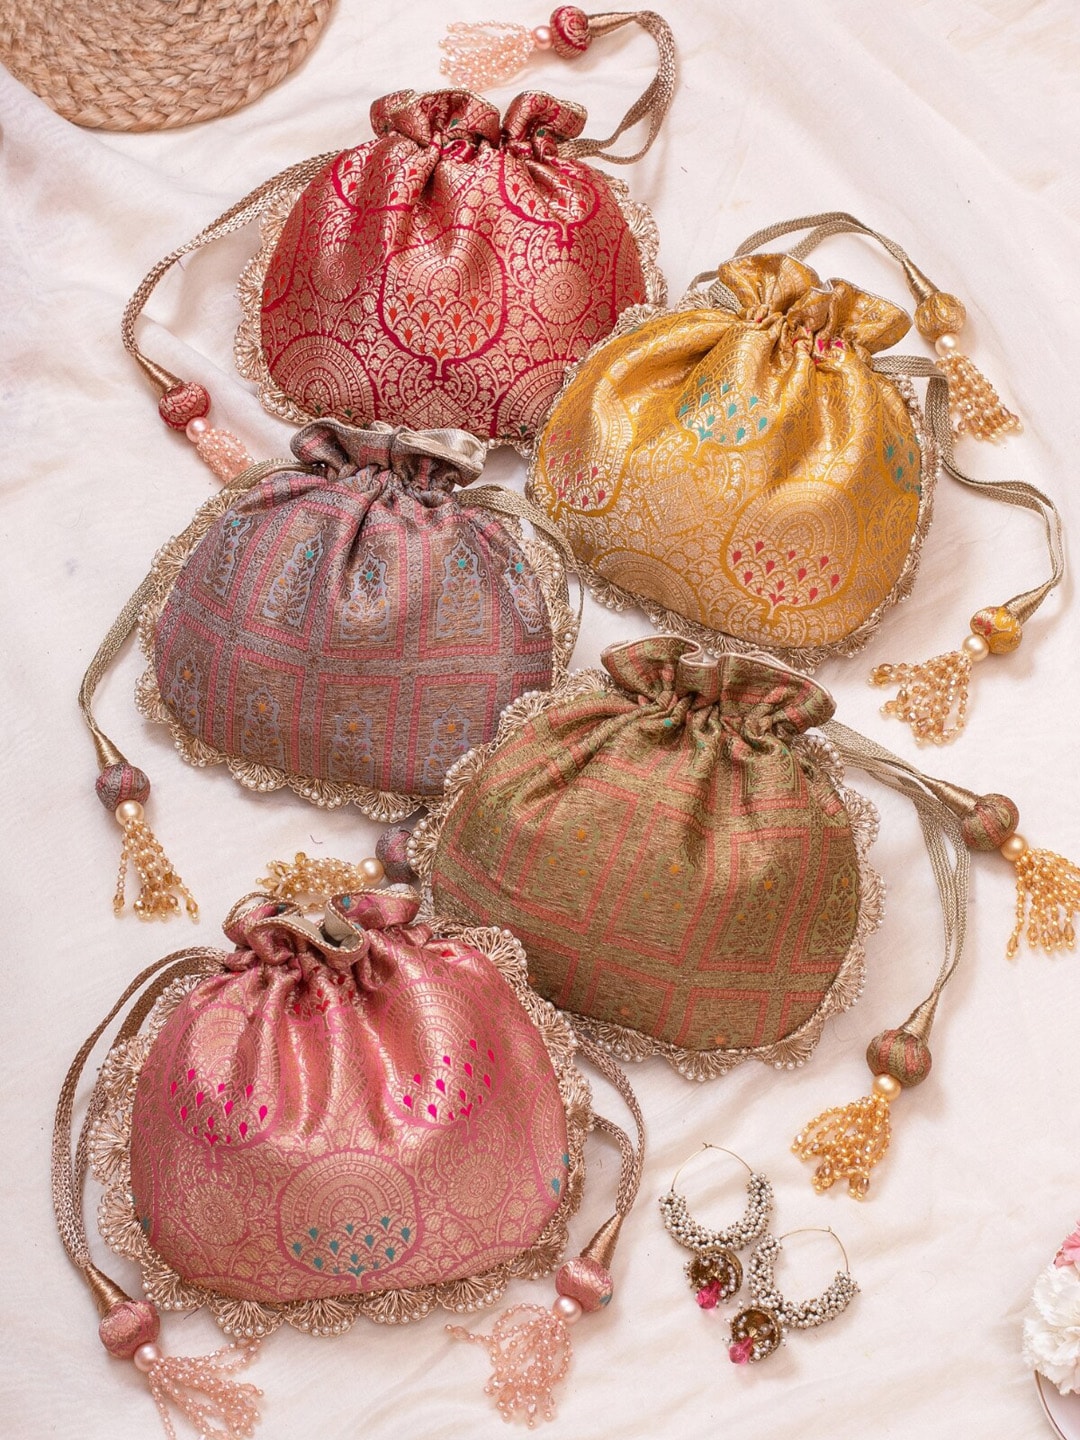 Buy Gold Floral Embroidered Potli Bag Bags Online in India - The AMYRA Store